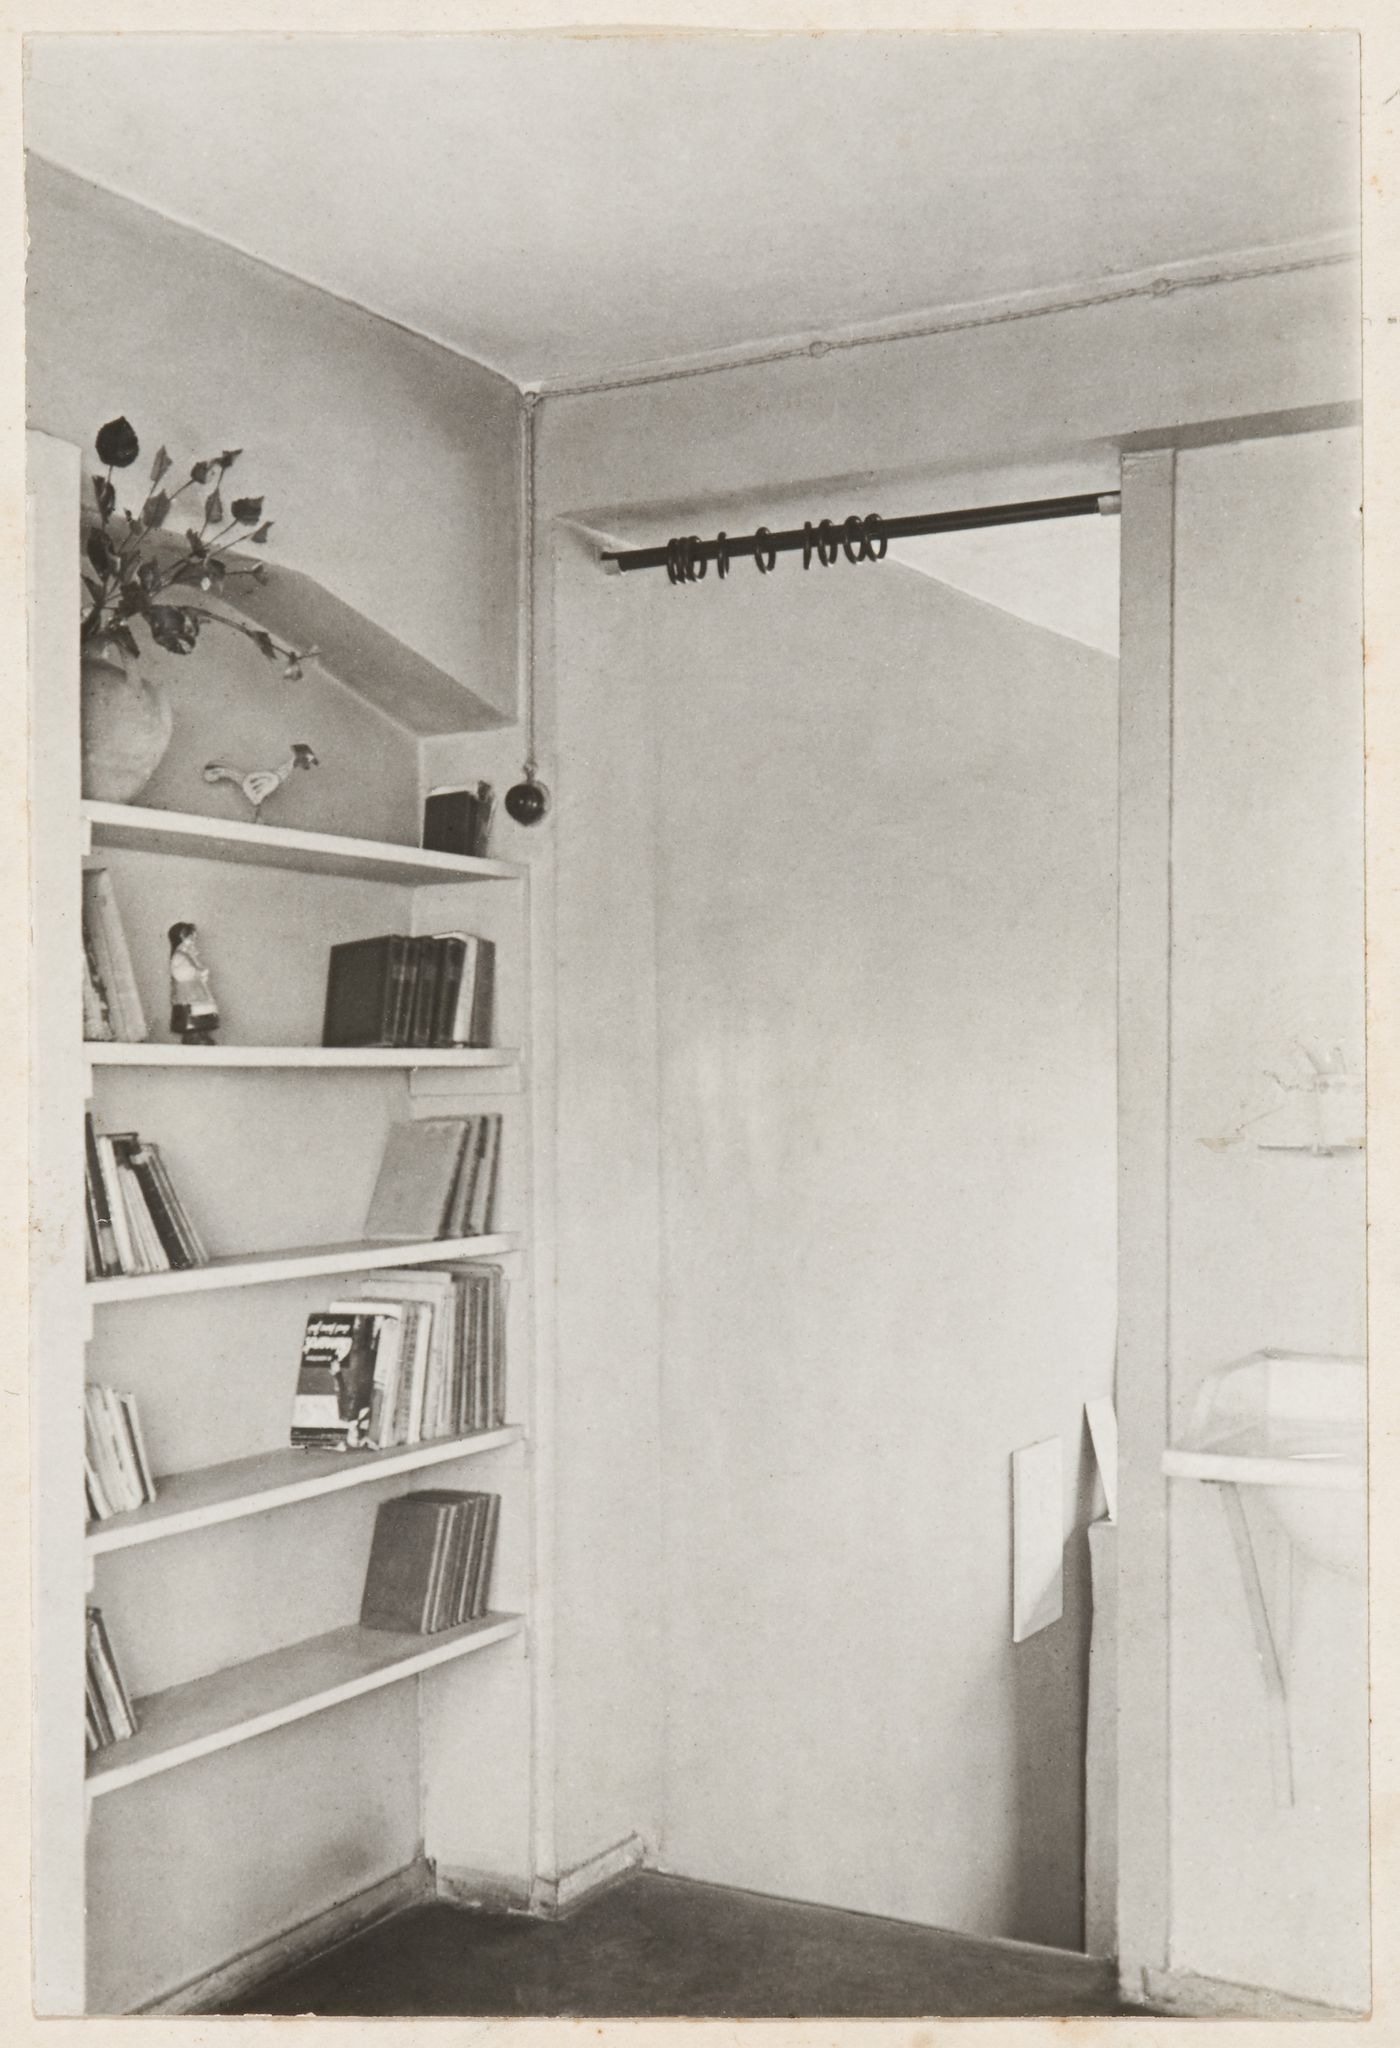 Interior view of a Type F unit apartment showing built-in bookshelves, 8 Gogolevskii Boulevard, Moscow, USSR